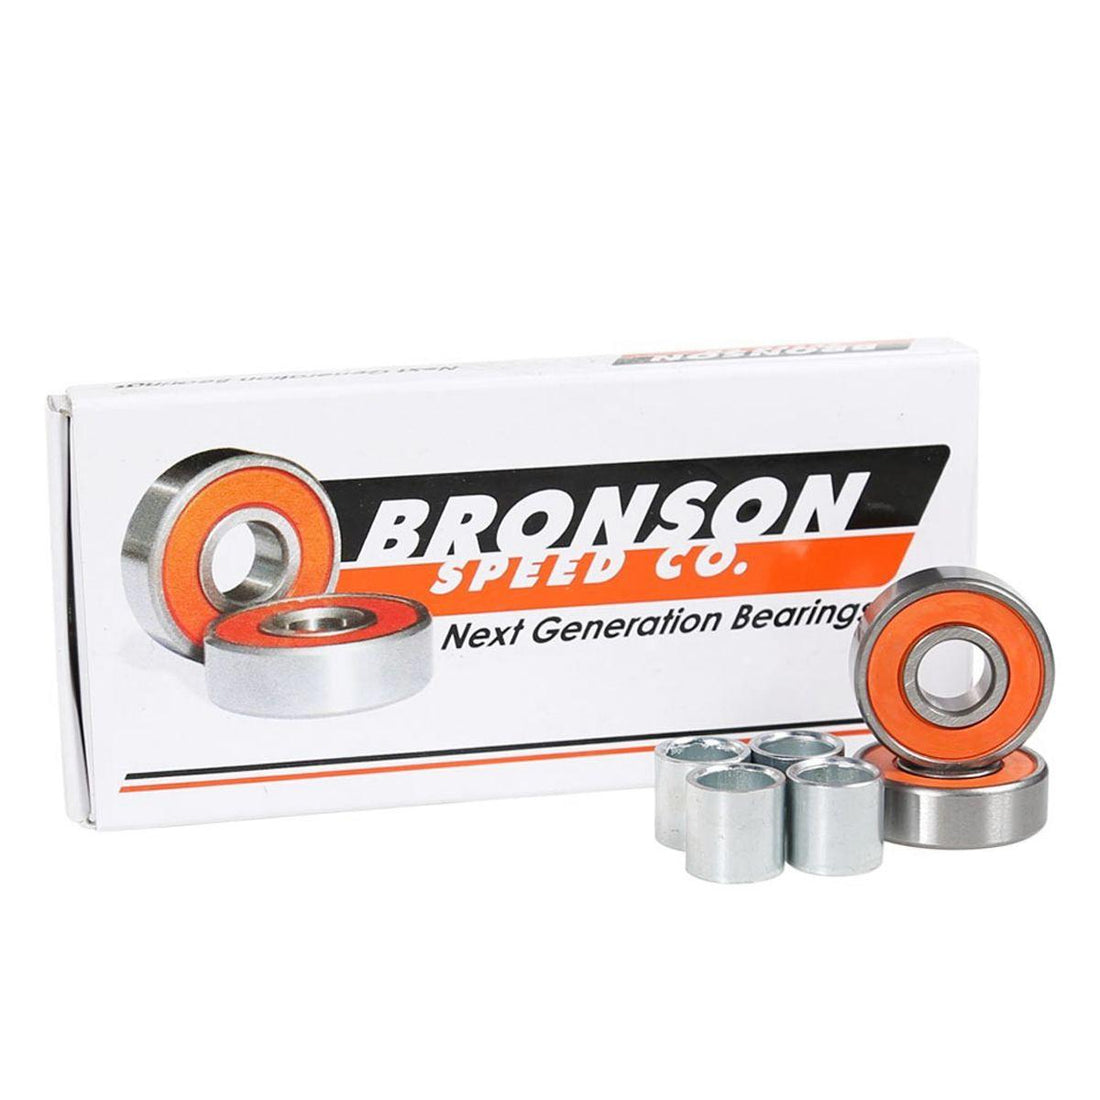 Bronson Speed Co Roulements G2